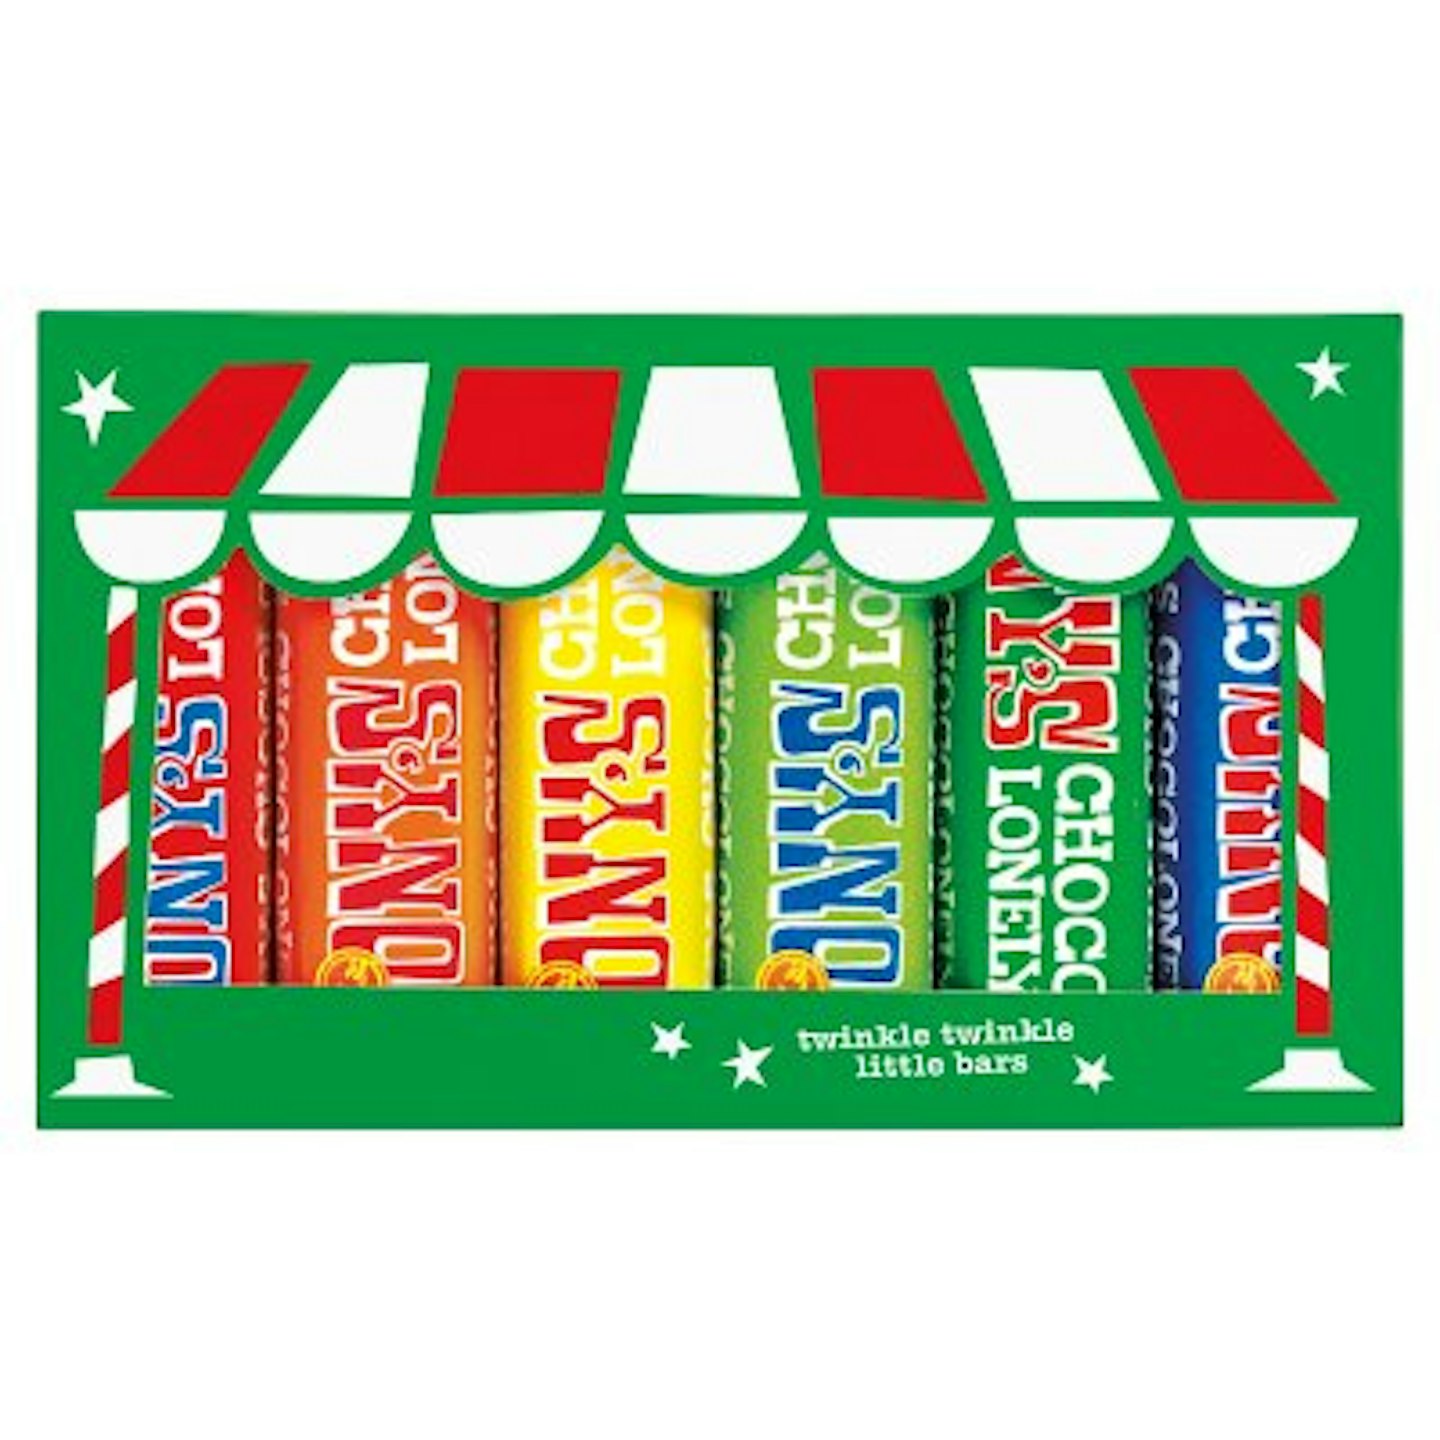 Tony's Chocolonely - gifts for foodies